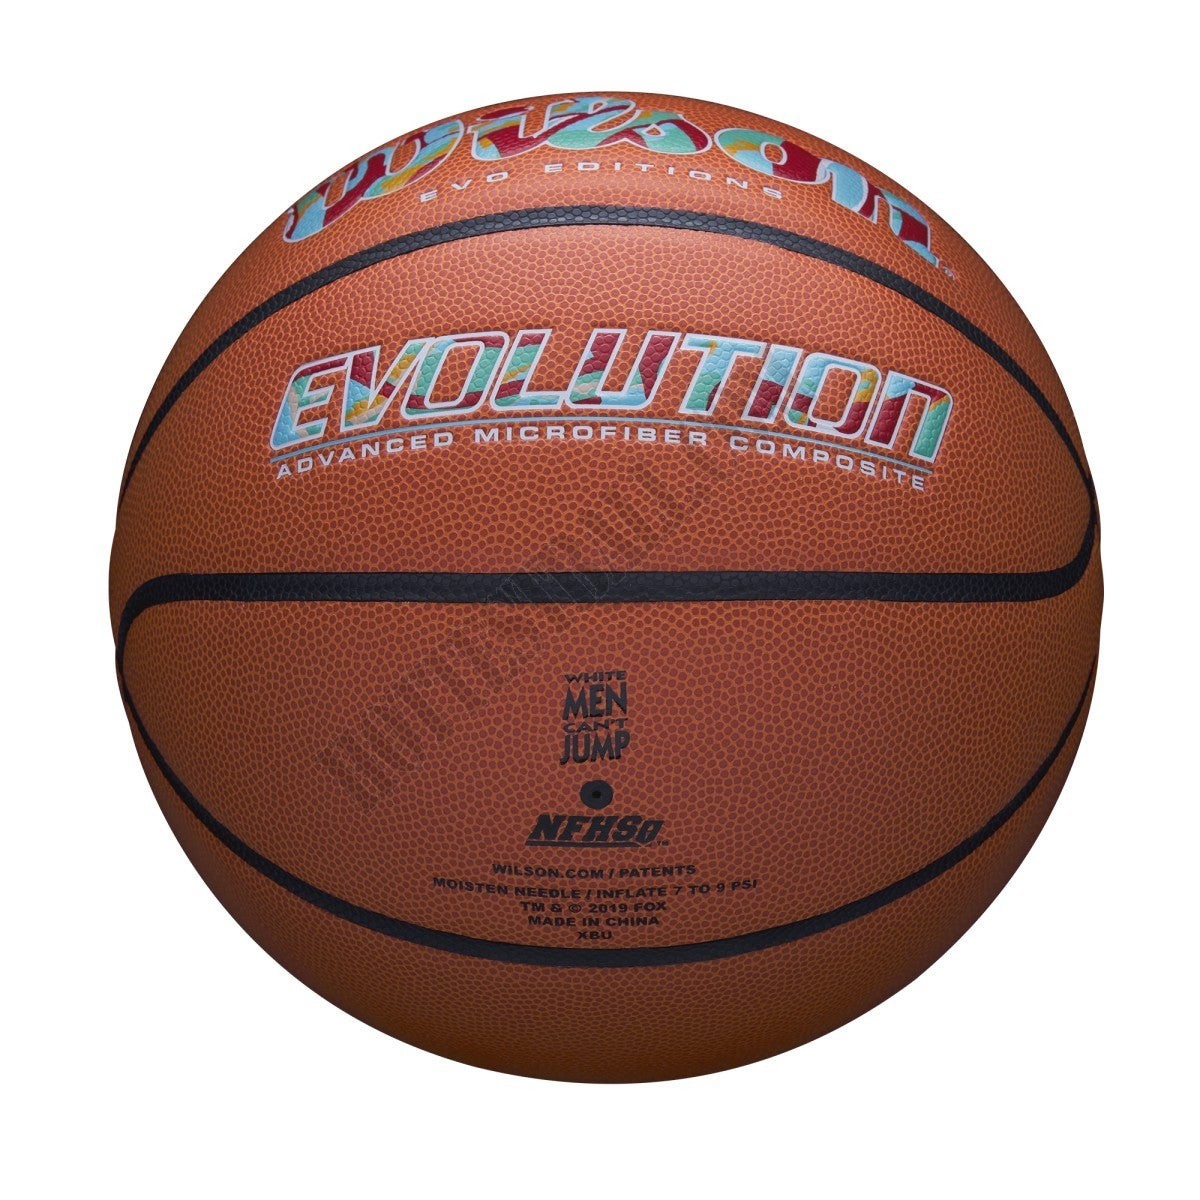 Evo Editions White Men Can’t Jump Basketball - Wilson Discount Store - -7